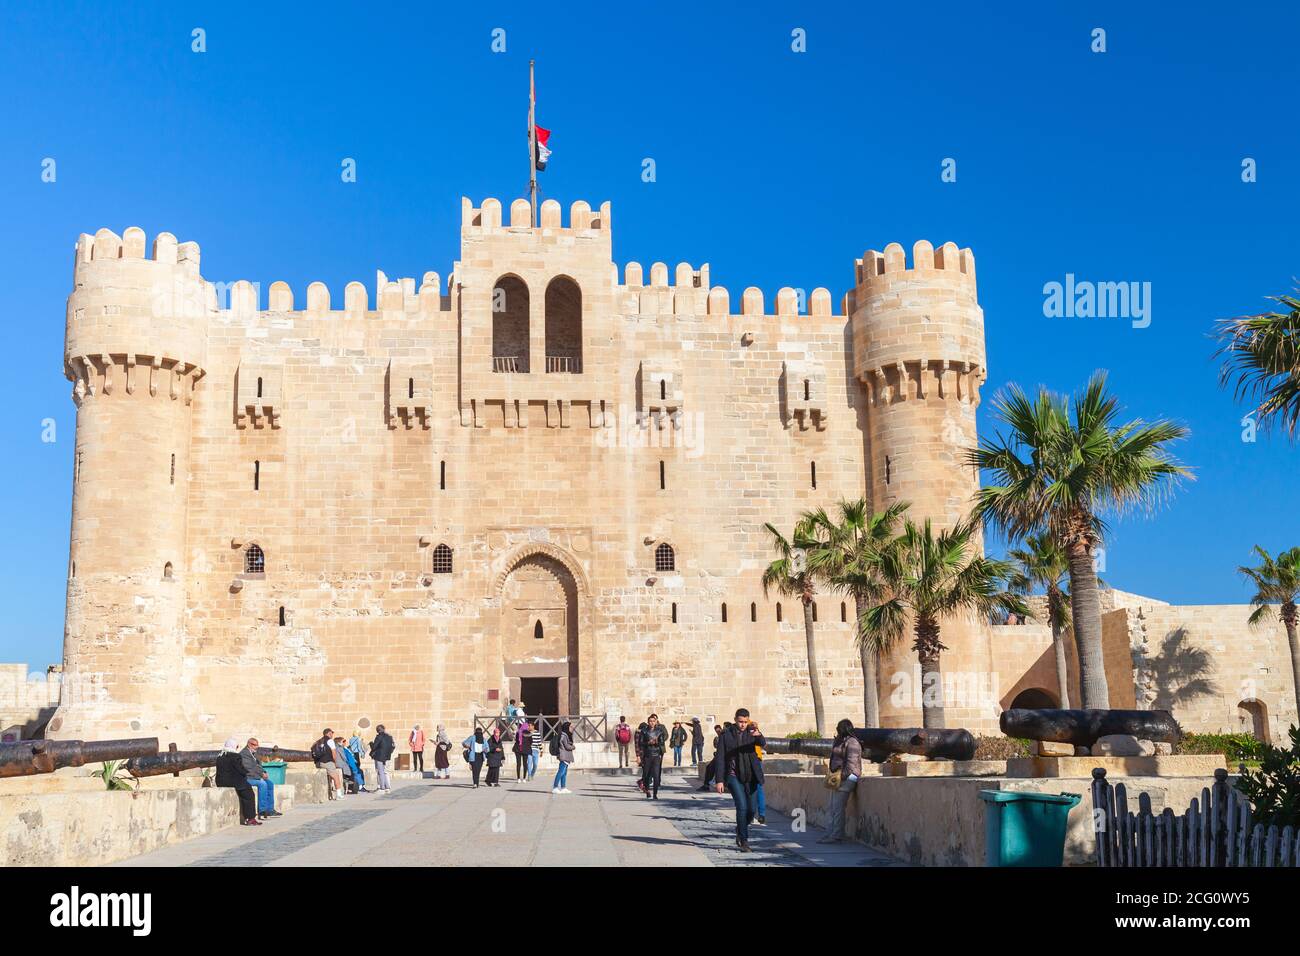 Alexandria, Egypt - December 14, 2018: People walk near The Citadel of Qaitbay or the Fort of Qaitbay. It is a 15th-century defensive fortress located Stock Photo